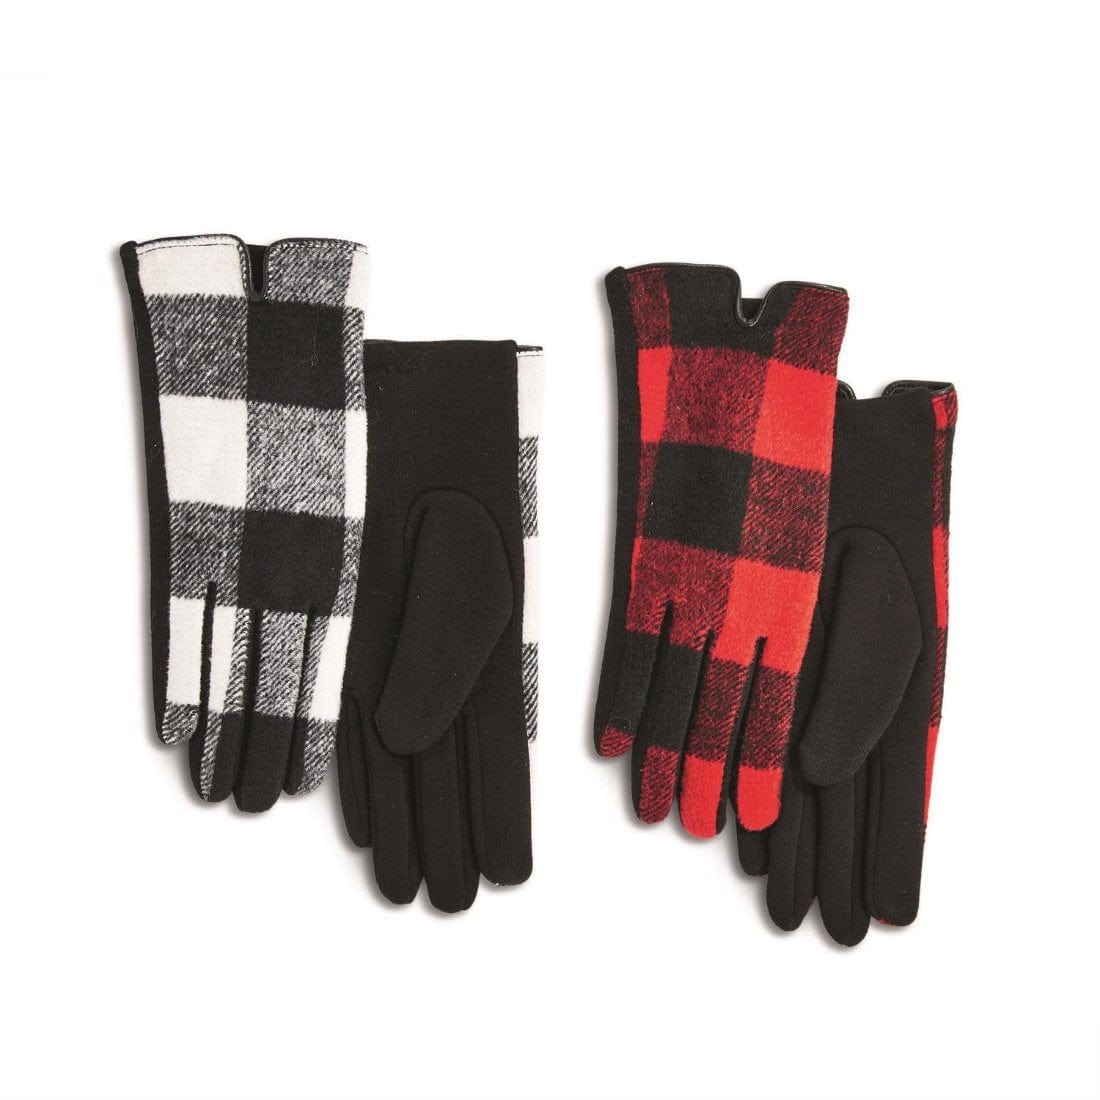 Two's Company tech touch buffalo check gloves in 2 color ways